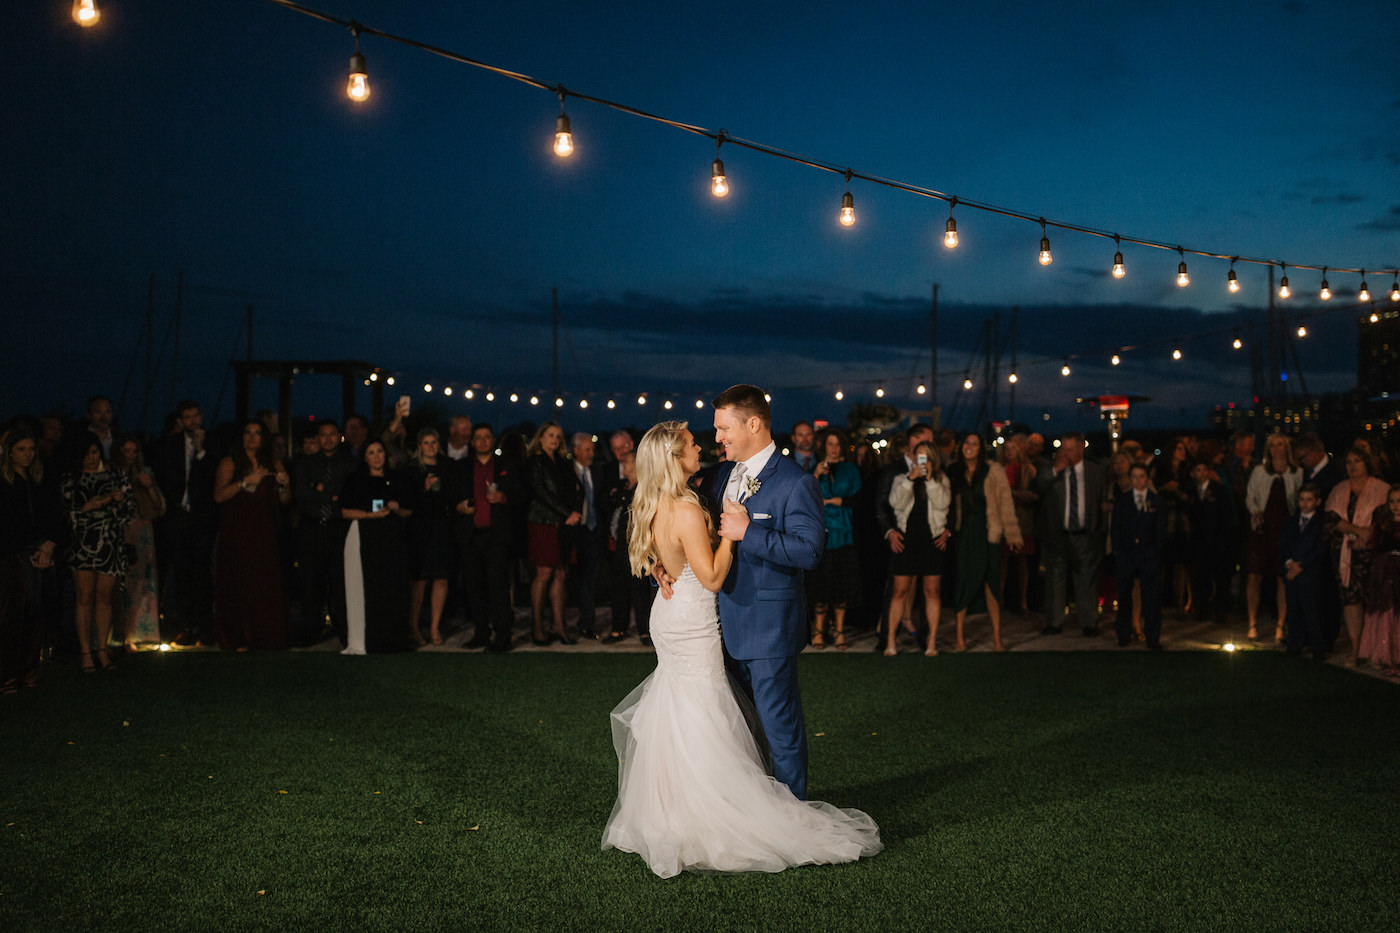 Tampa Bay Bride and Groom First Dance on Lawn of the Esplanade Location of Wedding Venue The Vinoy Renaissance Resort in Downtown St. Petersburg, String Lights | Florida Luxury Wedding Planner Parties A’ La Carte | Wedding DJ Grant Hemond and Associates